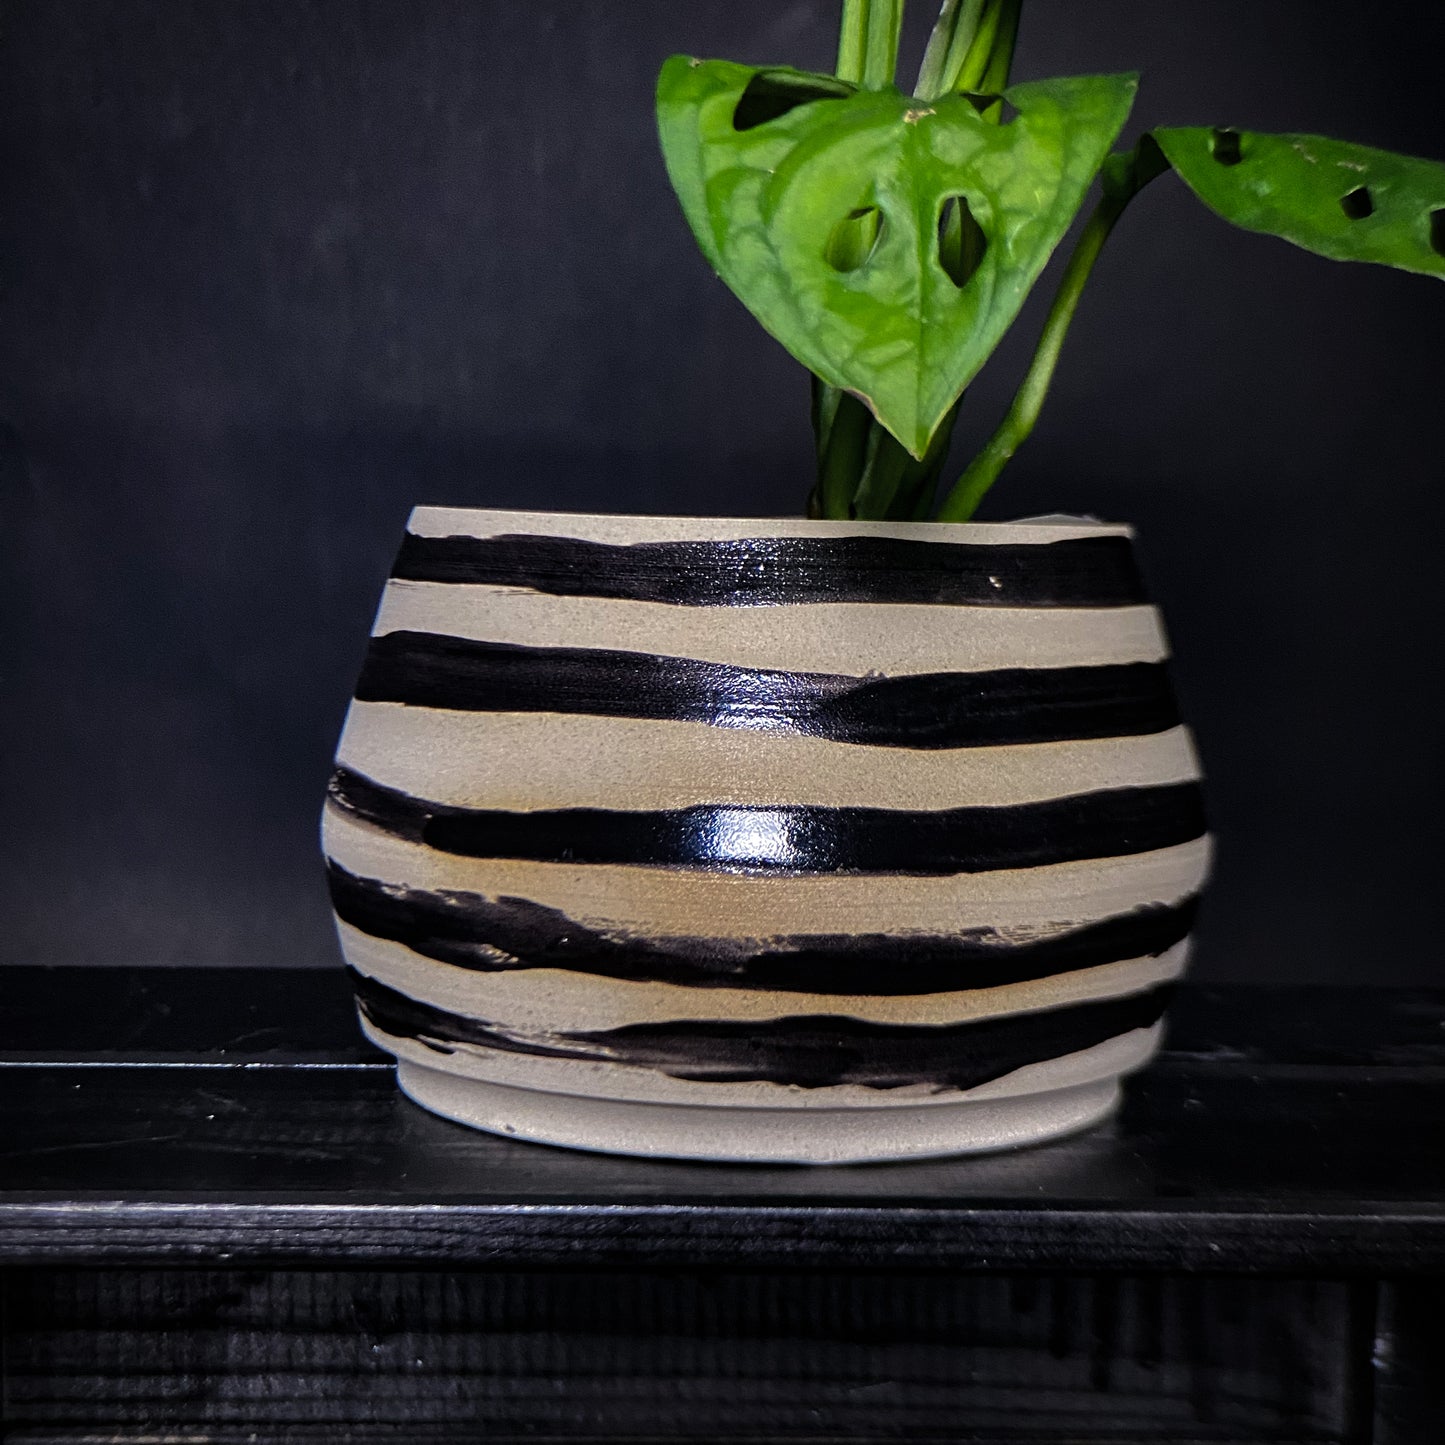 Planpot holder - White clay decorated with black shiny lines